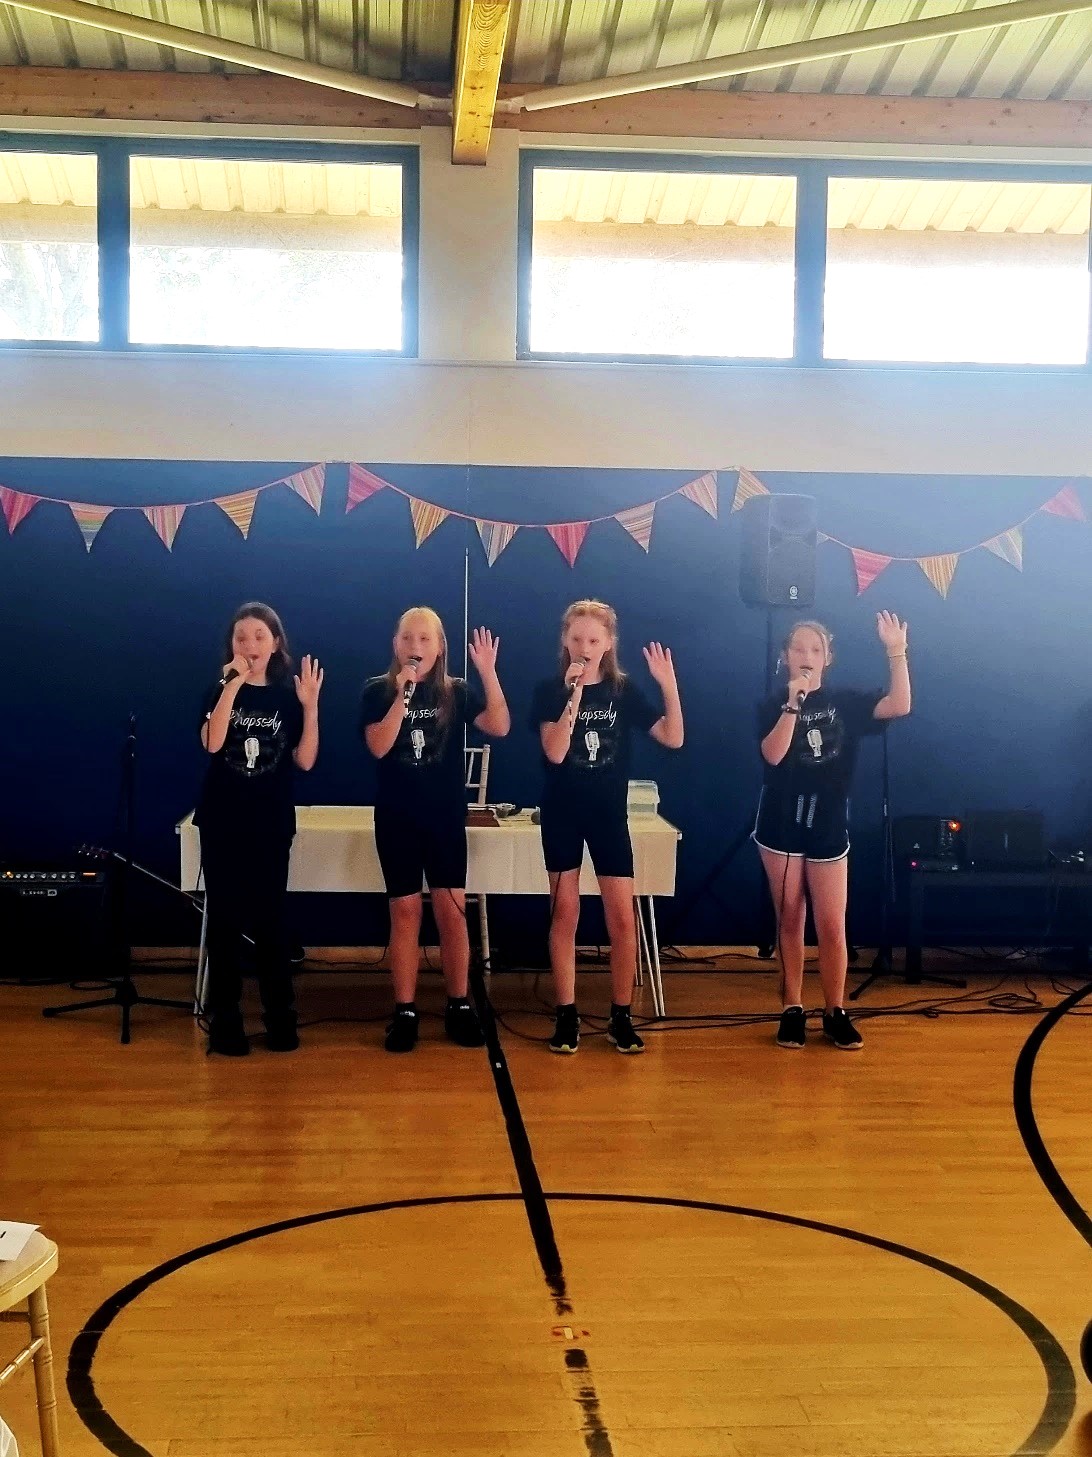 Four young people with microphones singing